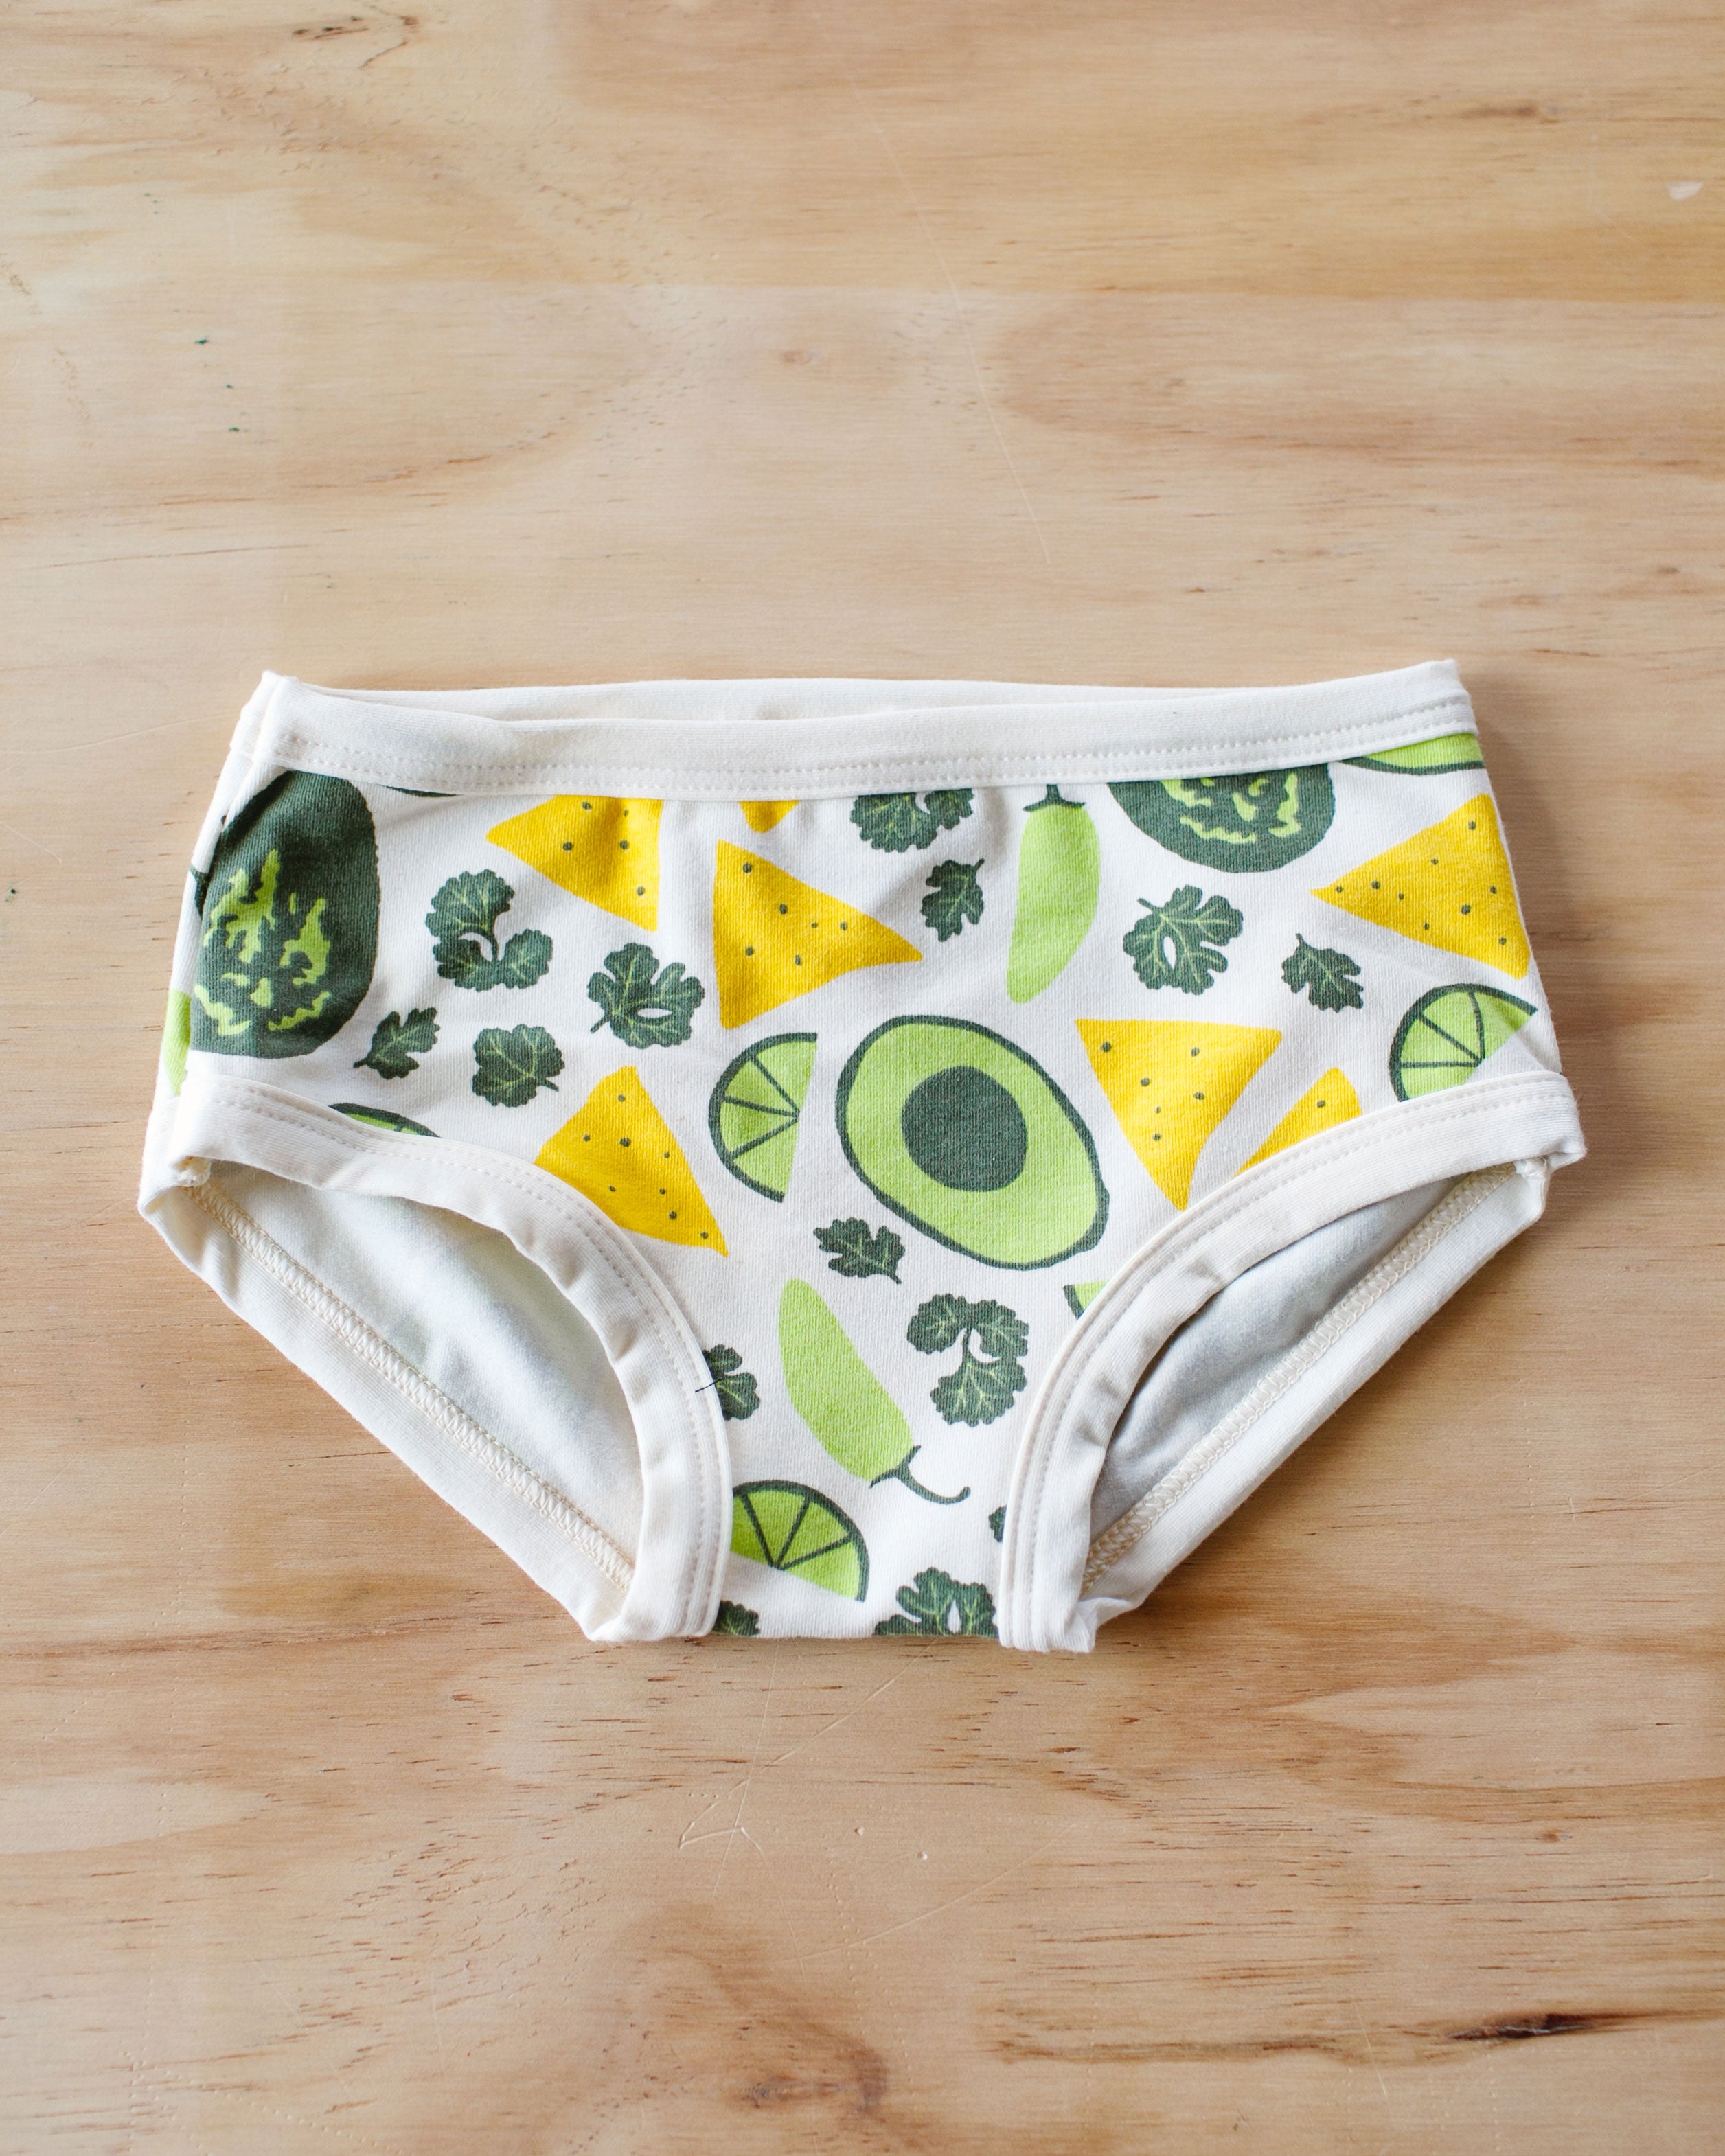 Flat lay of Thunderpants Kids style underwear in our Party Guac print: a deconstructed guacamole (avocado, cilantro, pepper, lime, and tortilla chip) print.